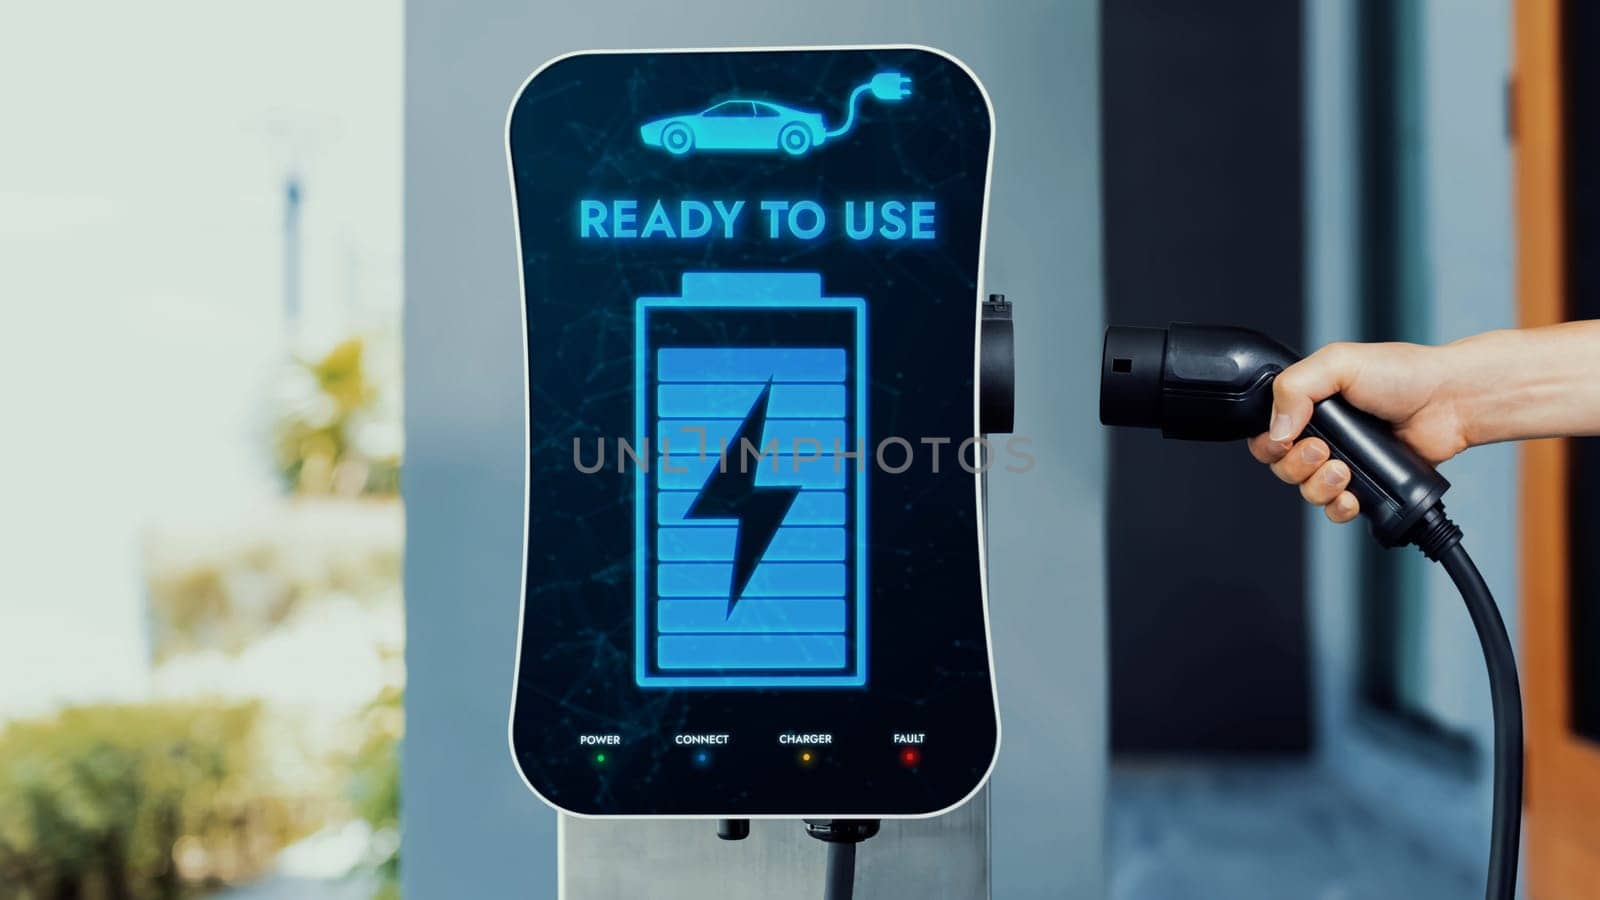 Home electric charging station showing battery status interface on screen.Peruse by biancoblue